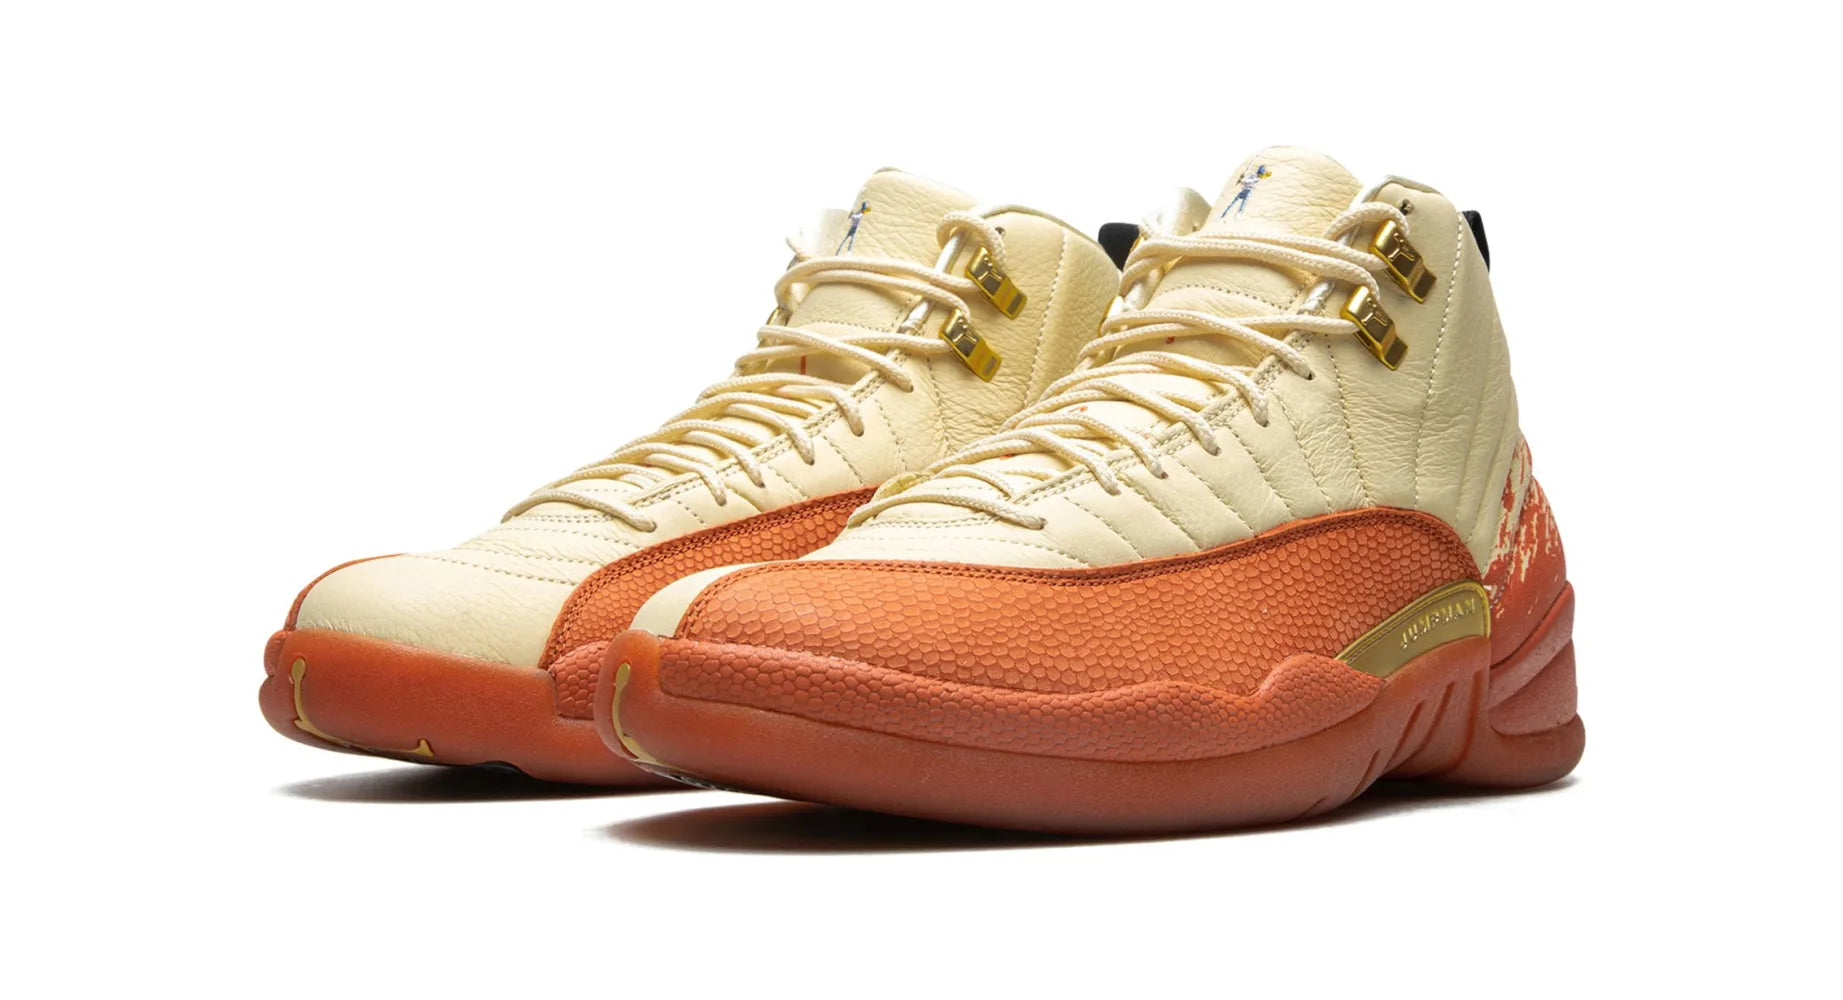 Jordan 12 Retro Eastside Golf Out of the Clay